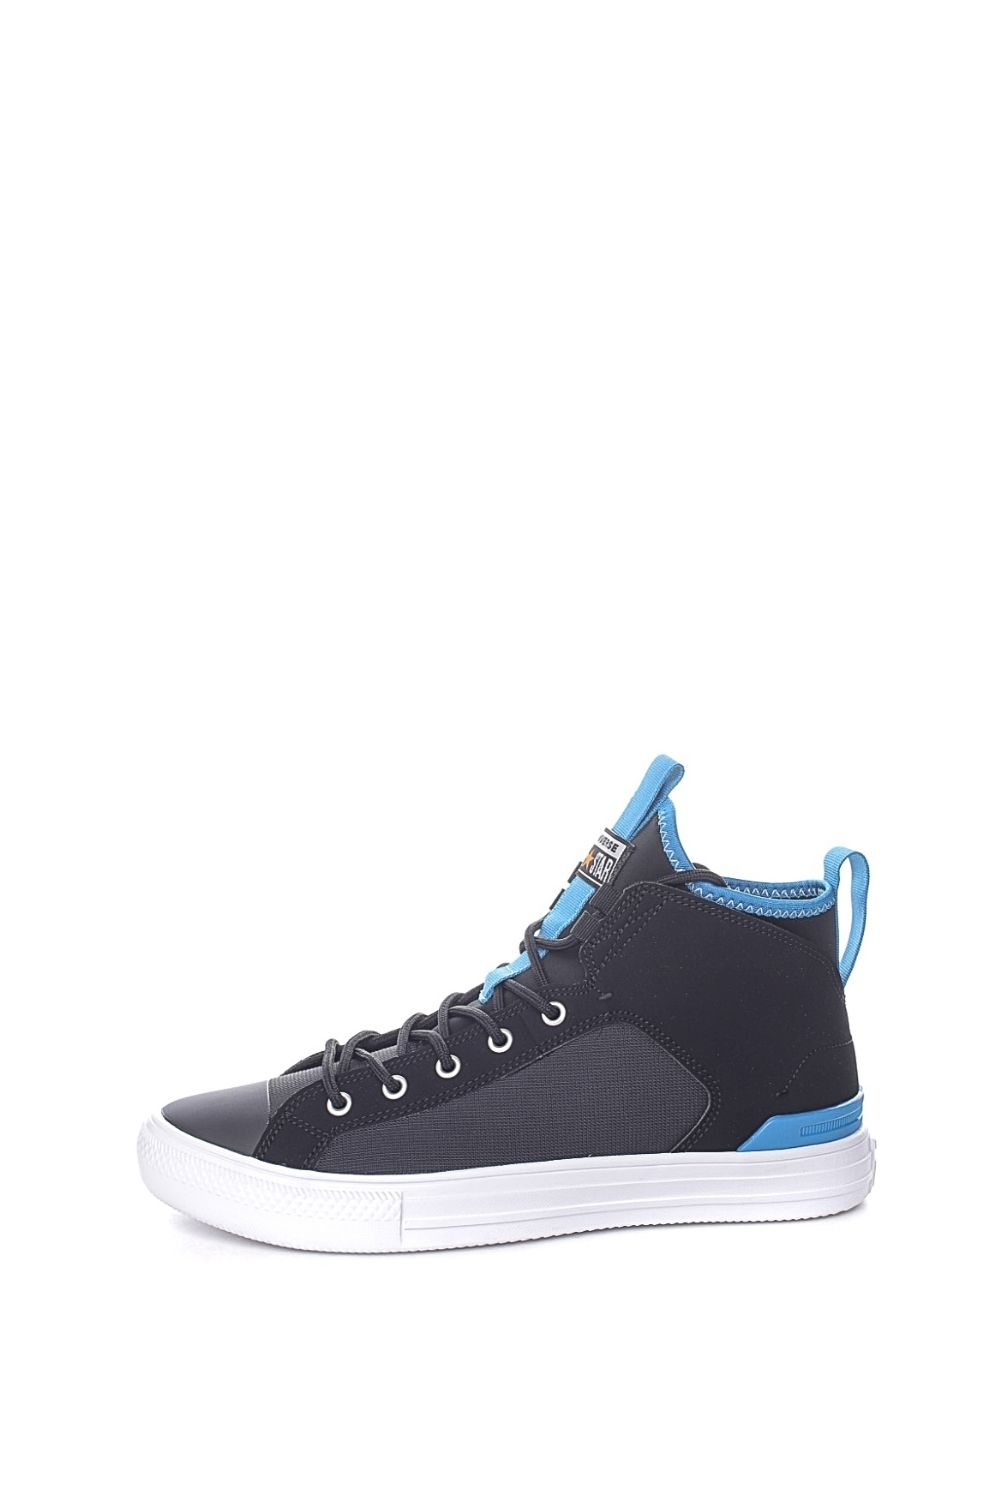 CONVERSE - Unisex μποτάκια sneakers CONVERSE Chuck Taylor AS Ultra Mid μαύρα Γυναικεία/Παπούτσια/Sneakers